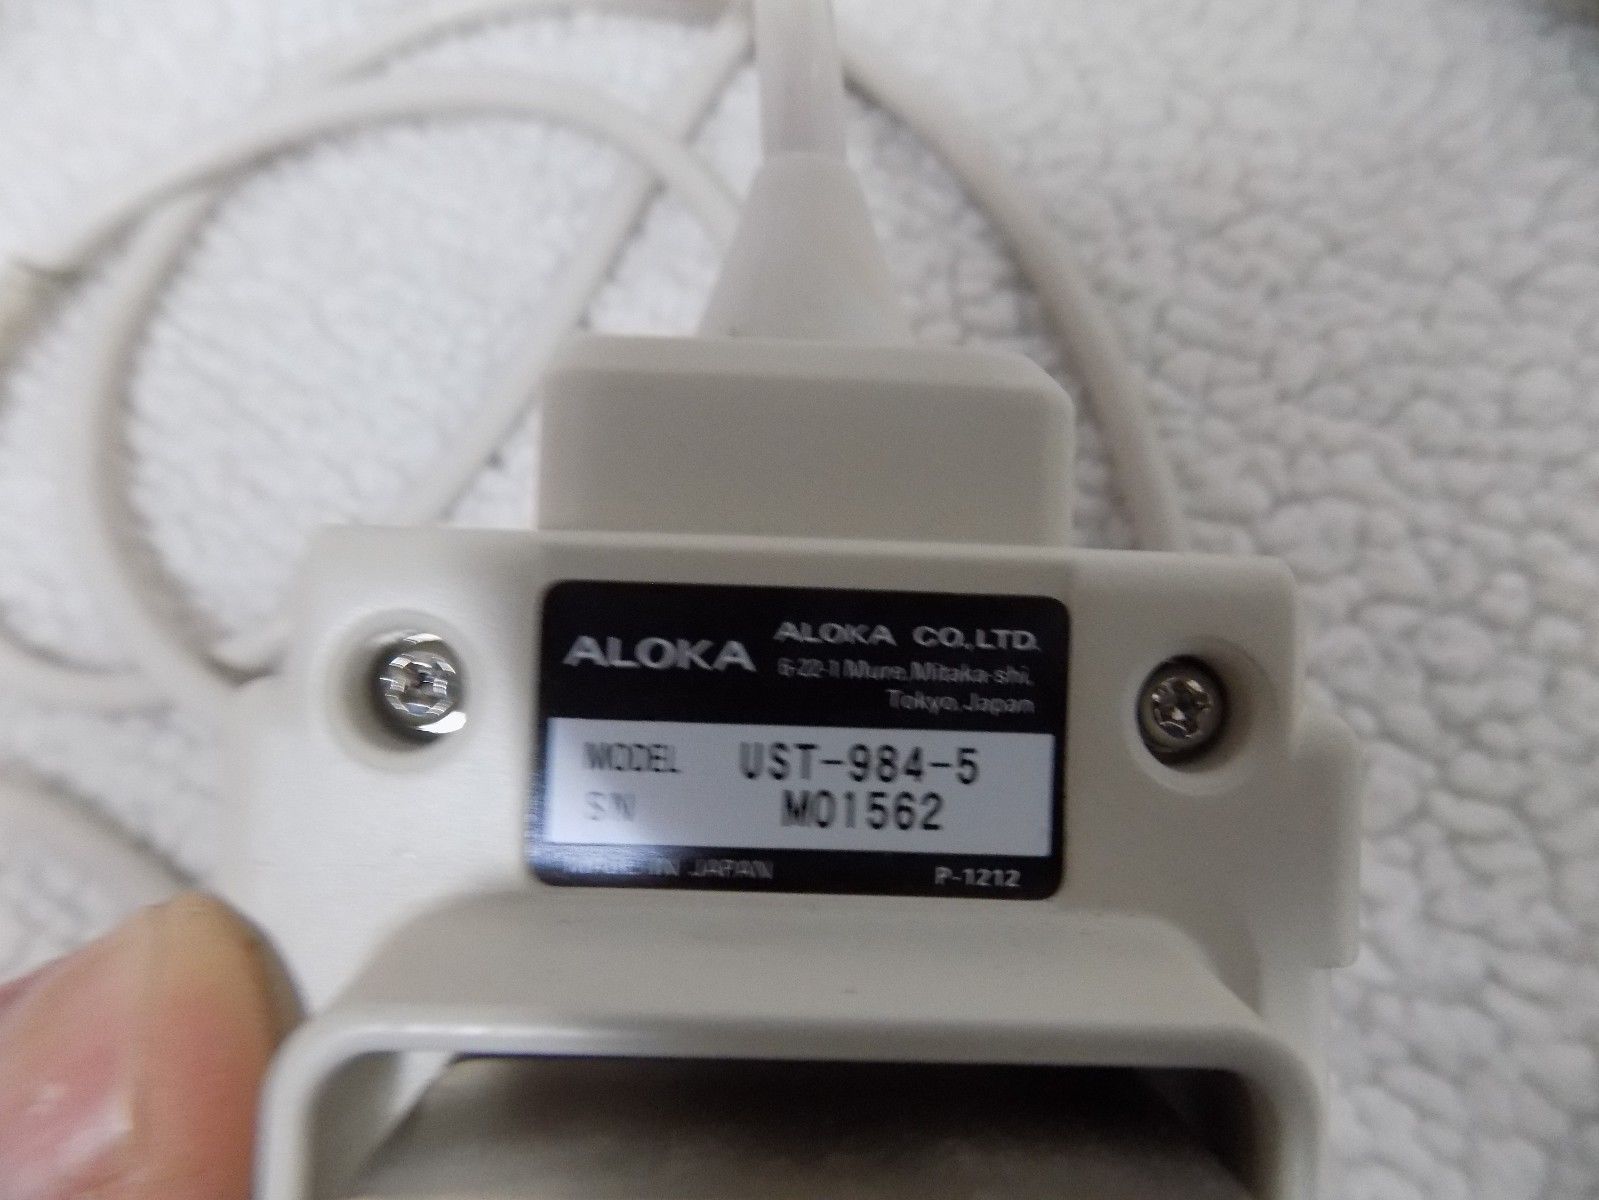 Aloka ust-984-5 Ultrasound Probe / Transducer PLEASE READ ENTIRE LISTING DIAGNOSTIC ULTRASOUND MACHINES FOR SALE